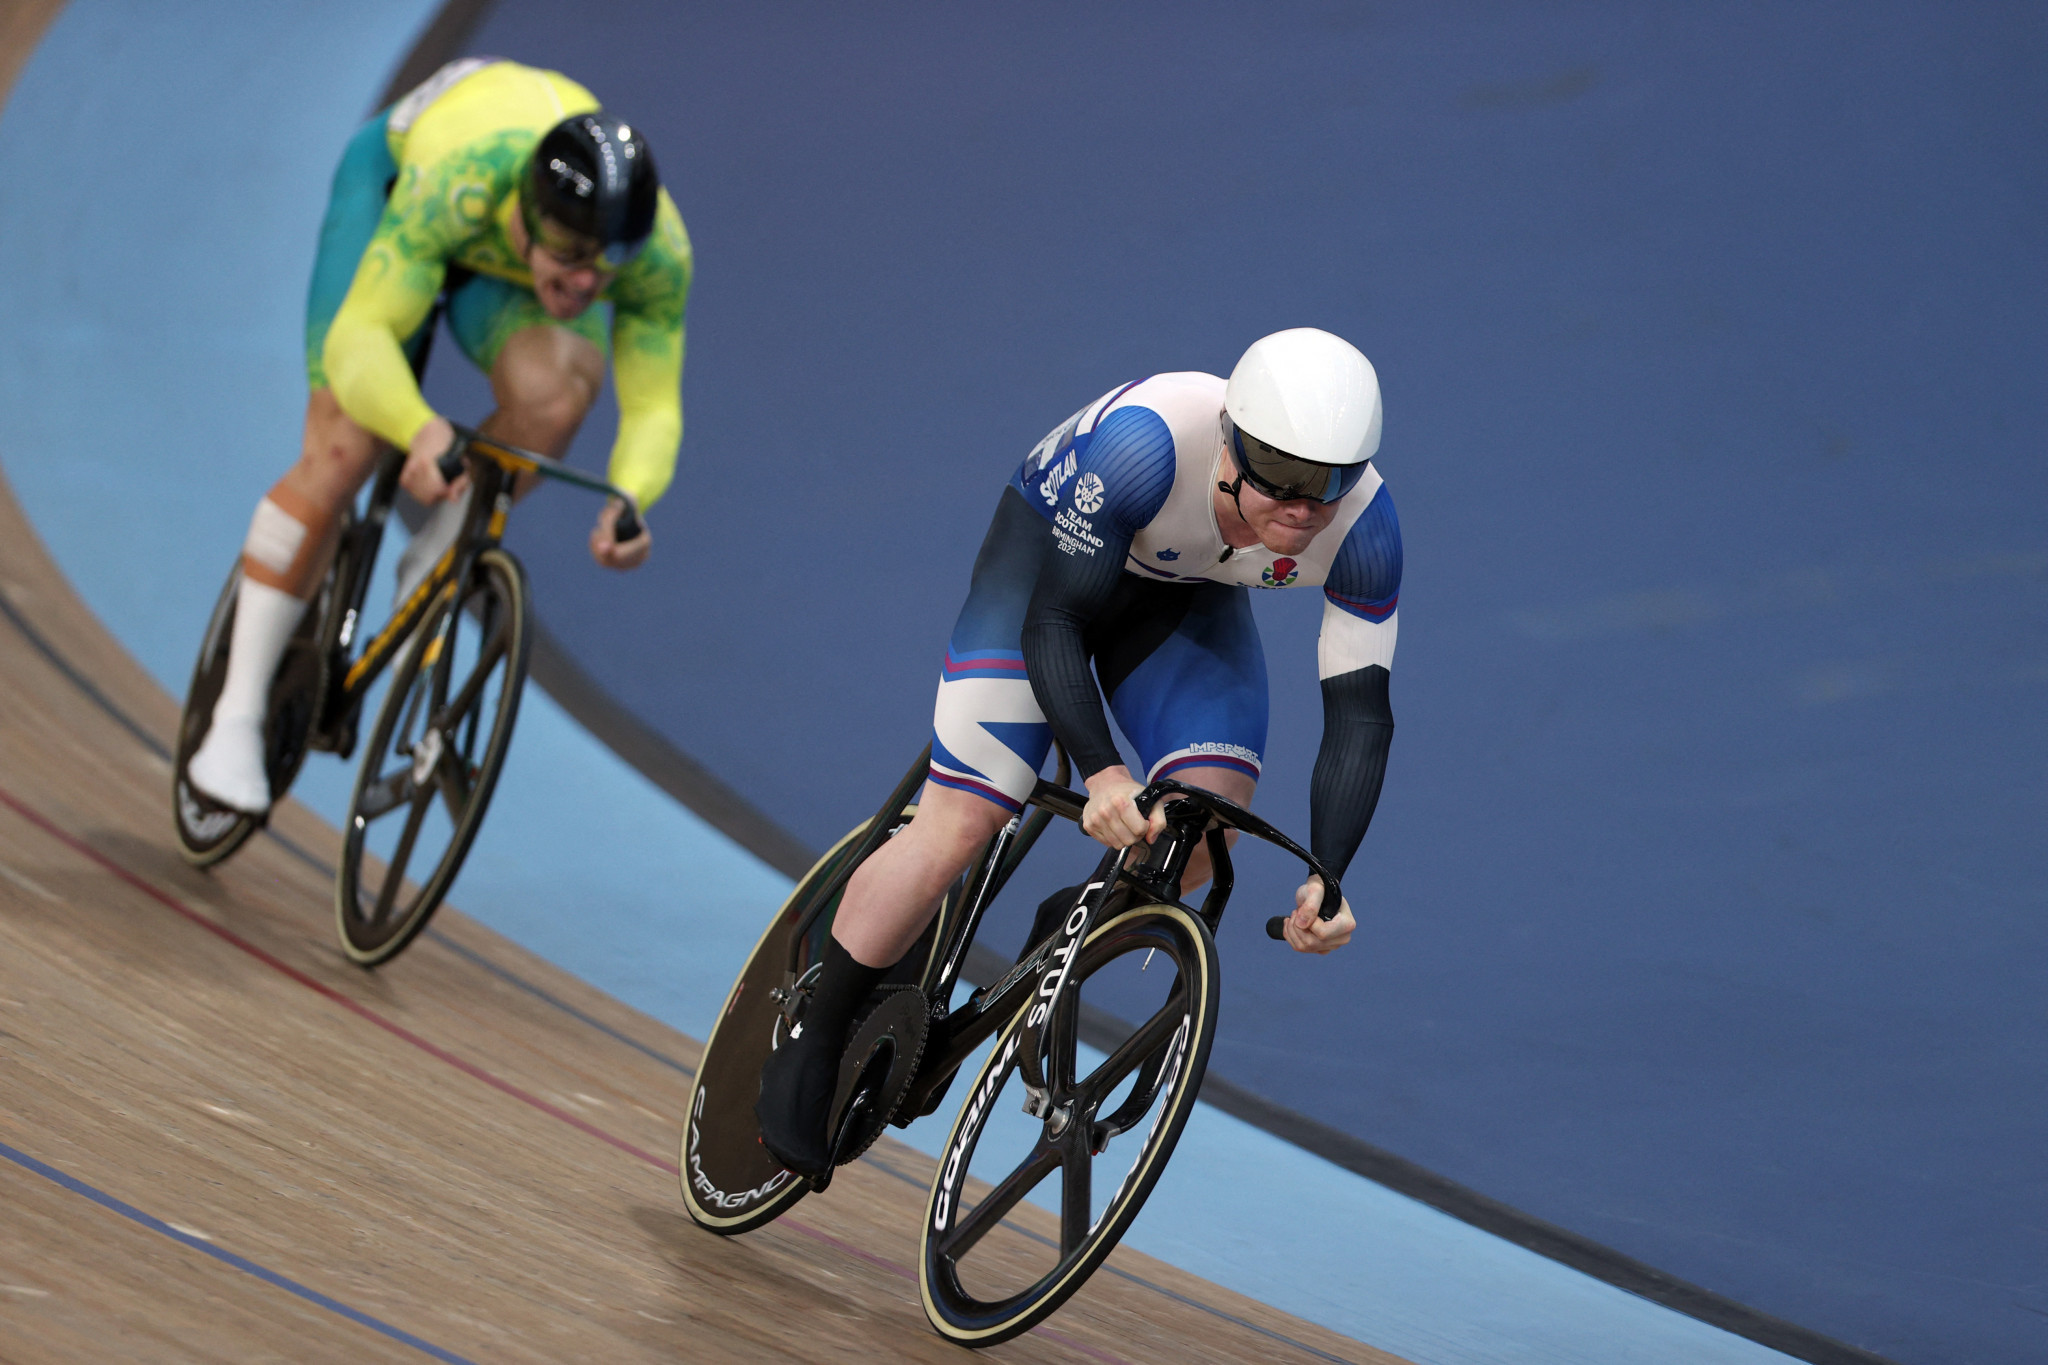 Scottish Cycling aiming to build on successful Commonwealth Games on track